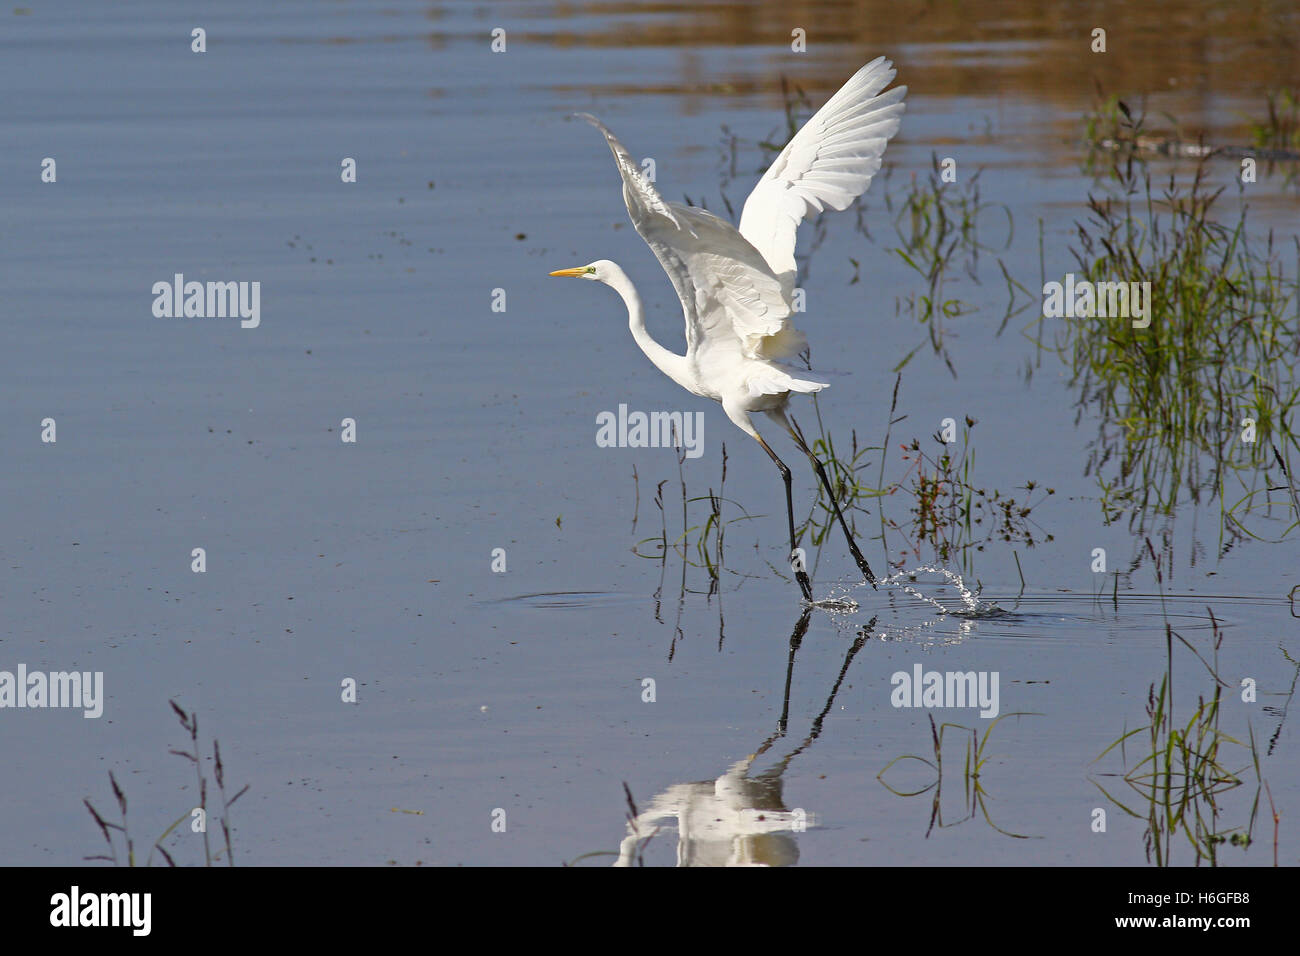 White great egret, egretta alba, in taking off  in flight in a swamp with reflections in water Stock Photo